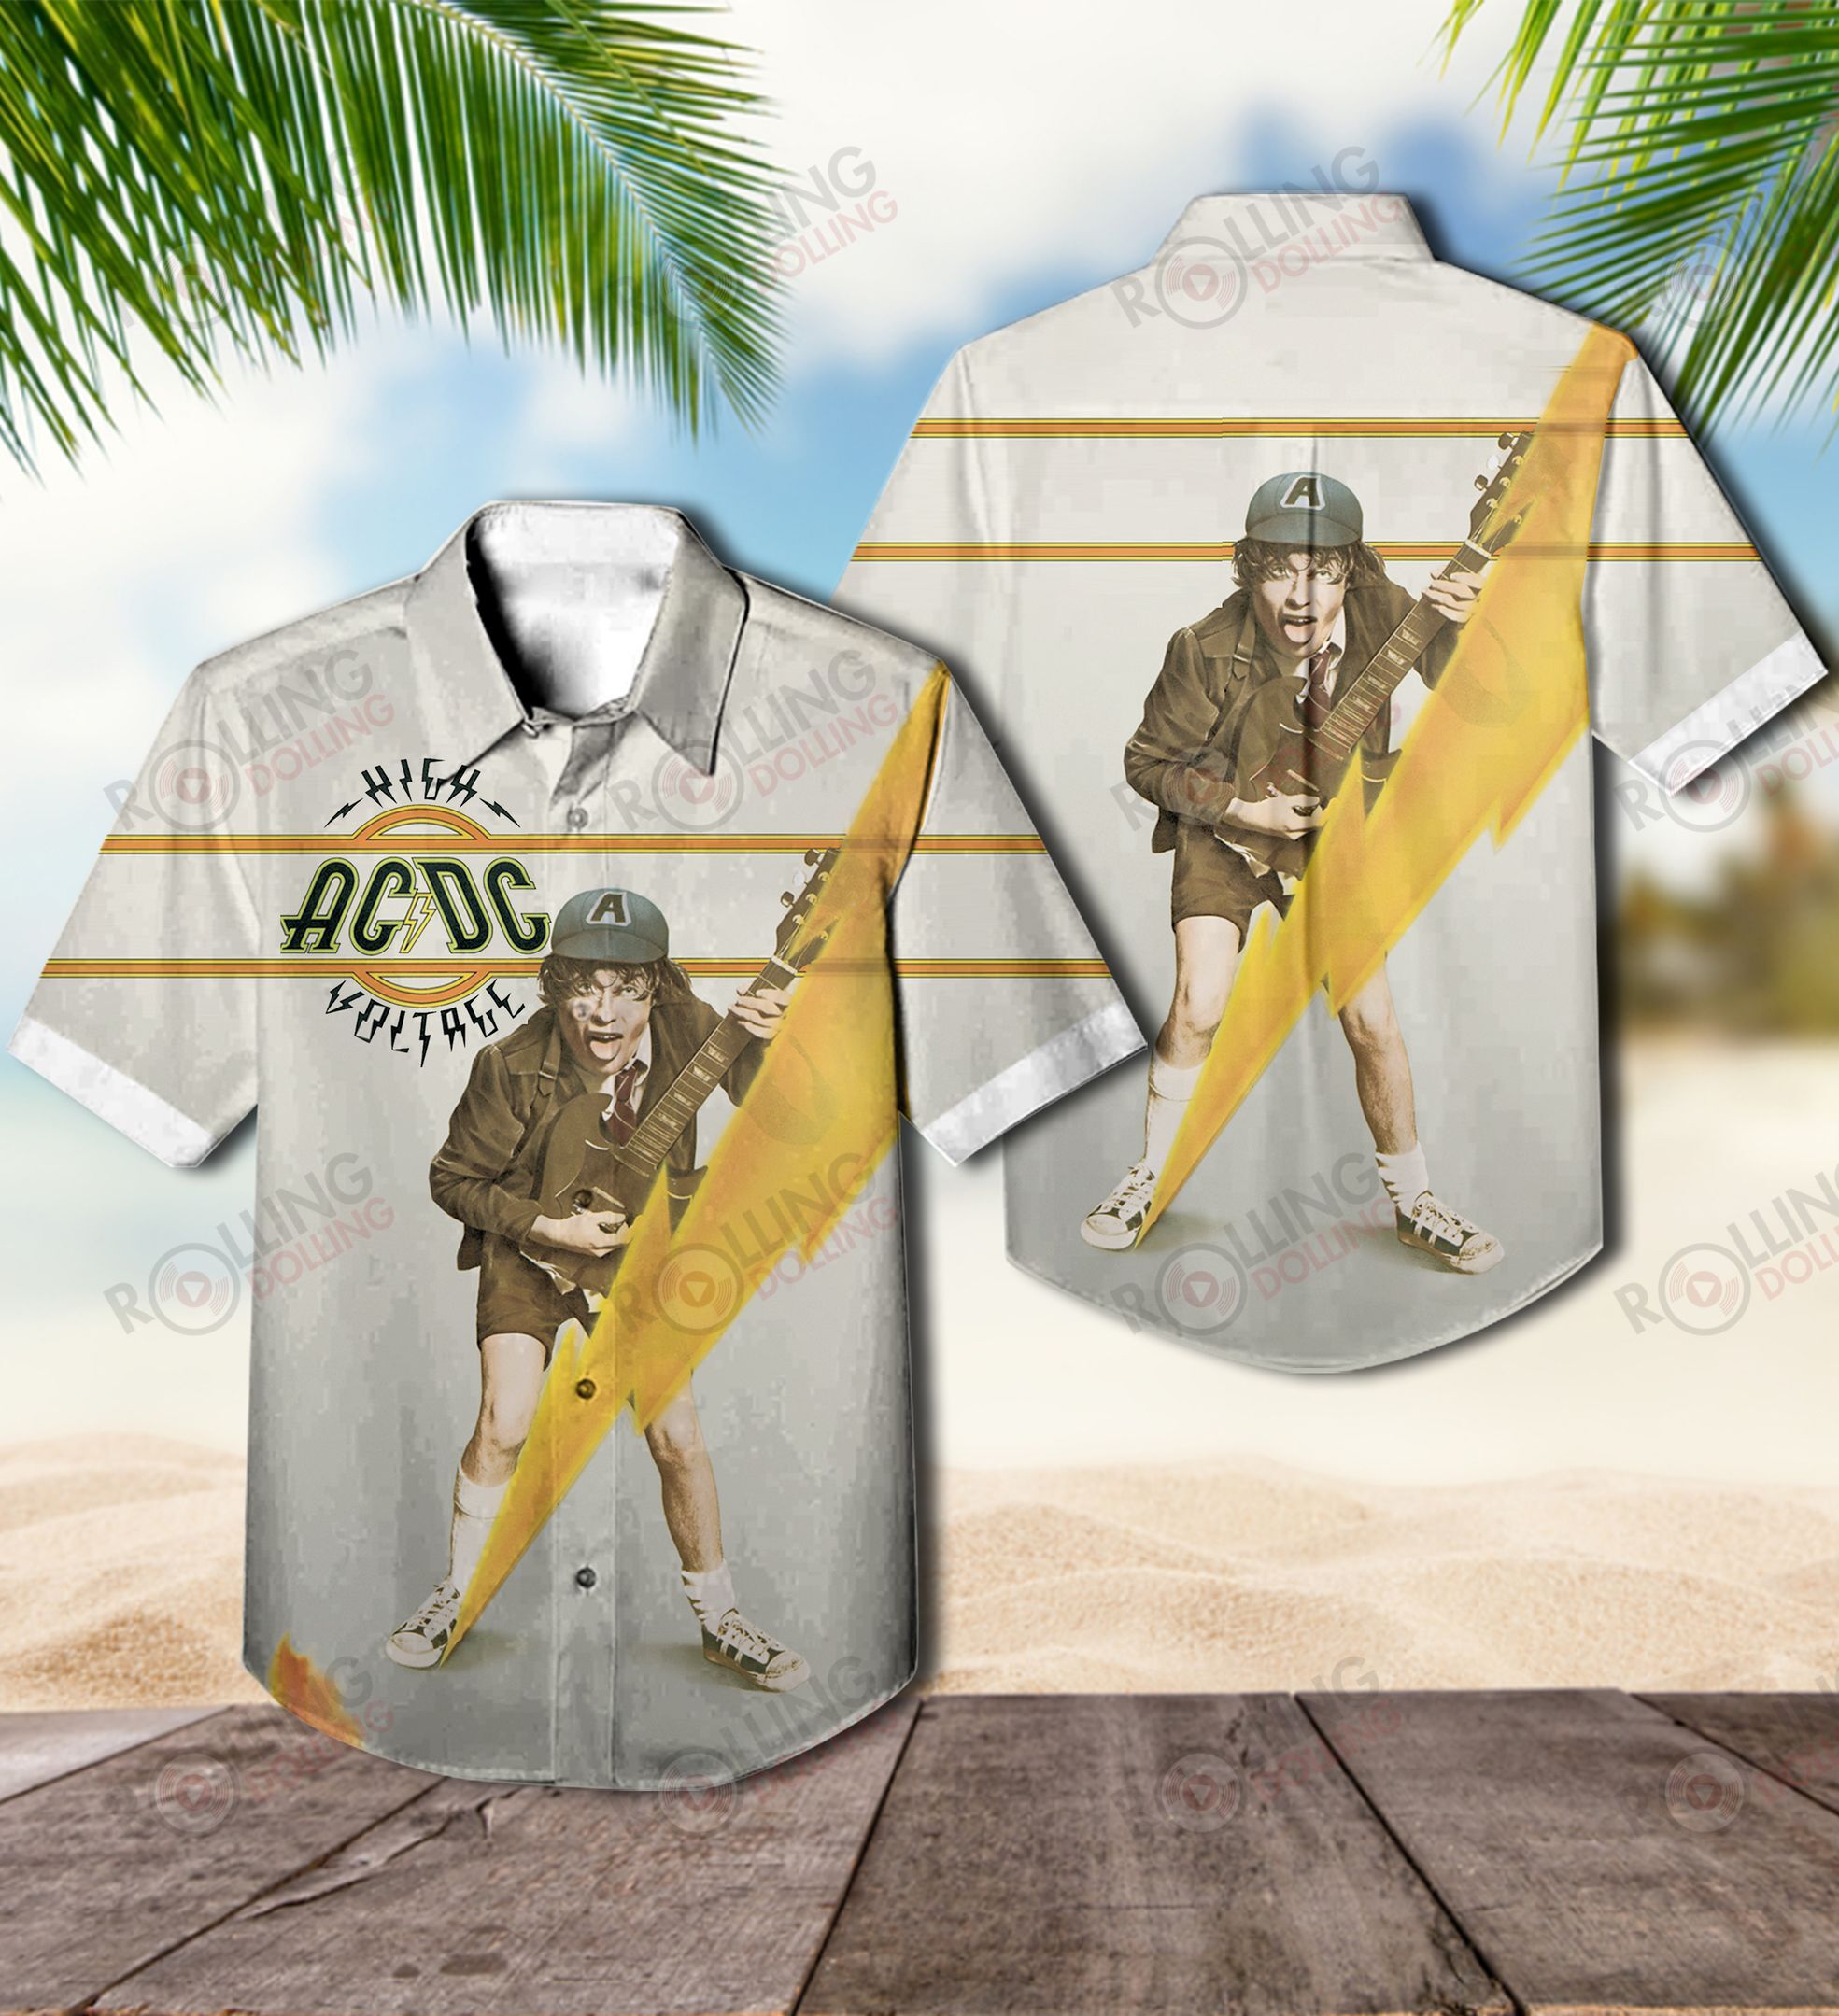 The Hawaiian Shirt is a popular shirt that is worn by Rock band fans 25